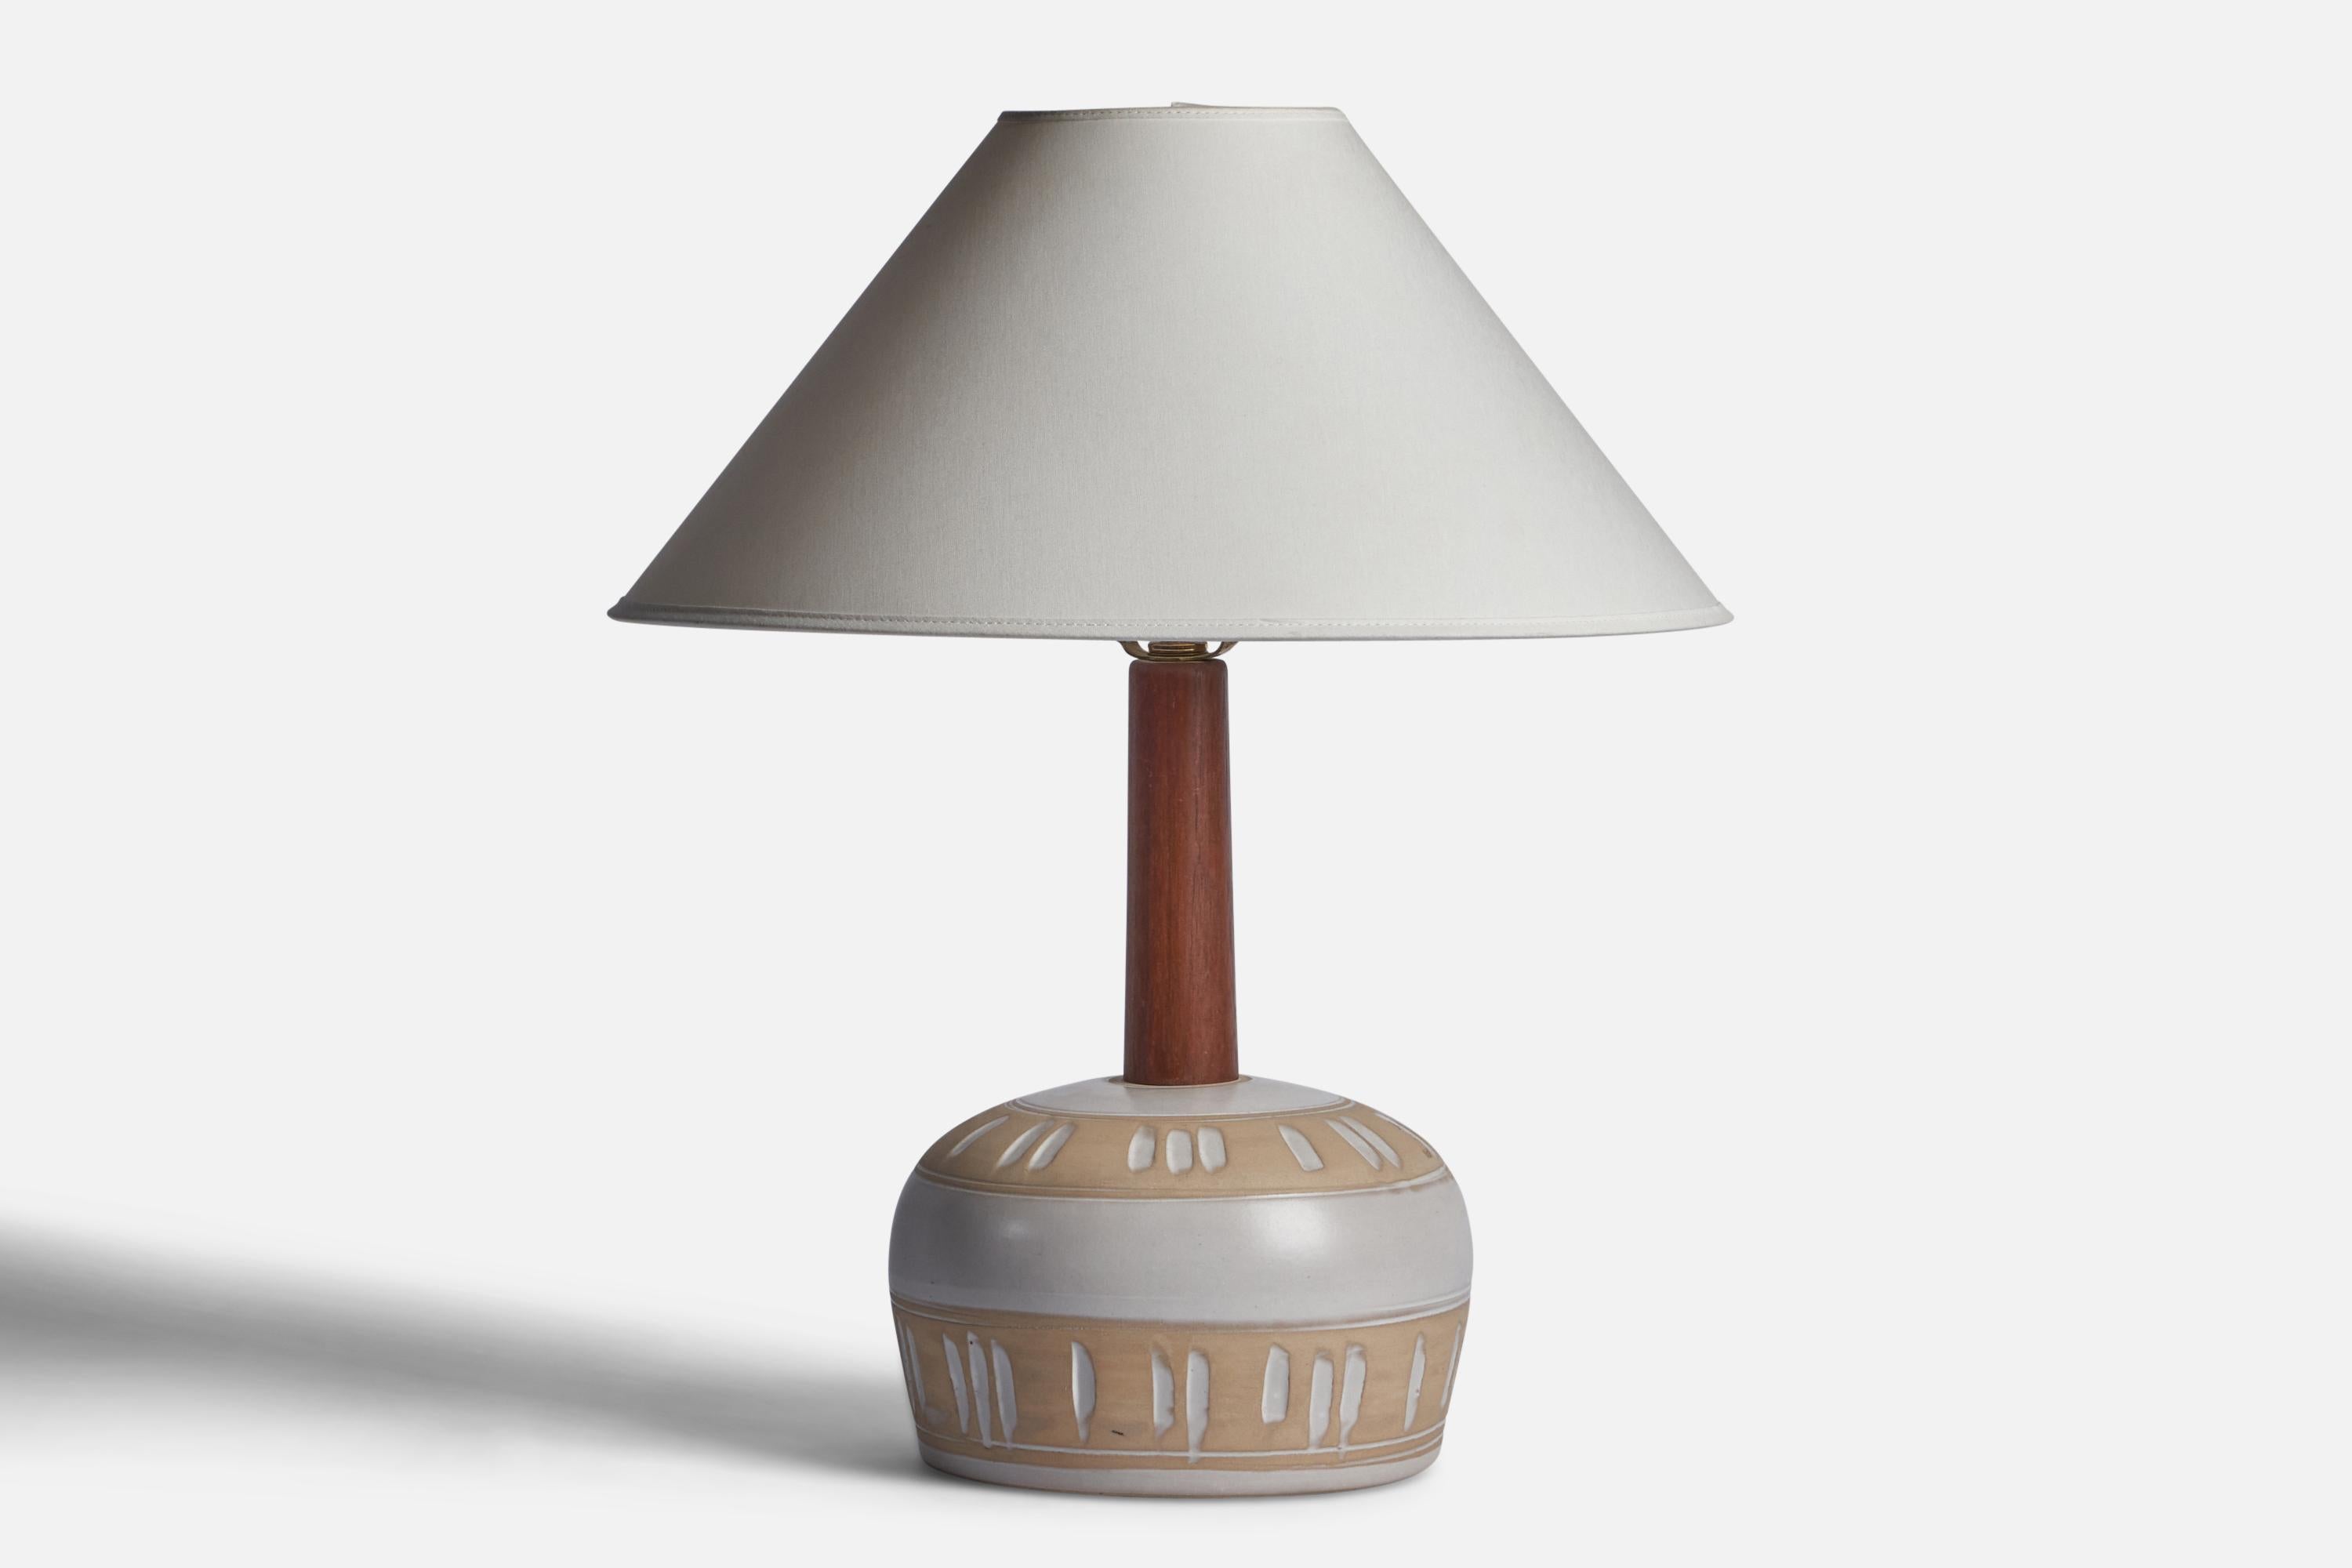 A beige and white-glazed ceramic and walnut table lamp designed by Jane & Gordon Martz and produced by Marshall Studios, USA, 1960s.

Dimensions of Lamp (inches): 14.5” H x 8.3” Diameter
Dimensions of Shade (inches): 4.5” Top Diameter x 16” Bottom